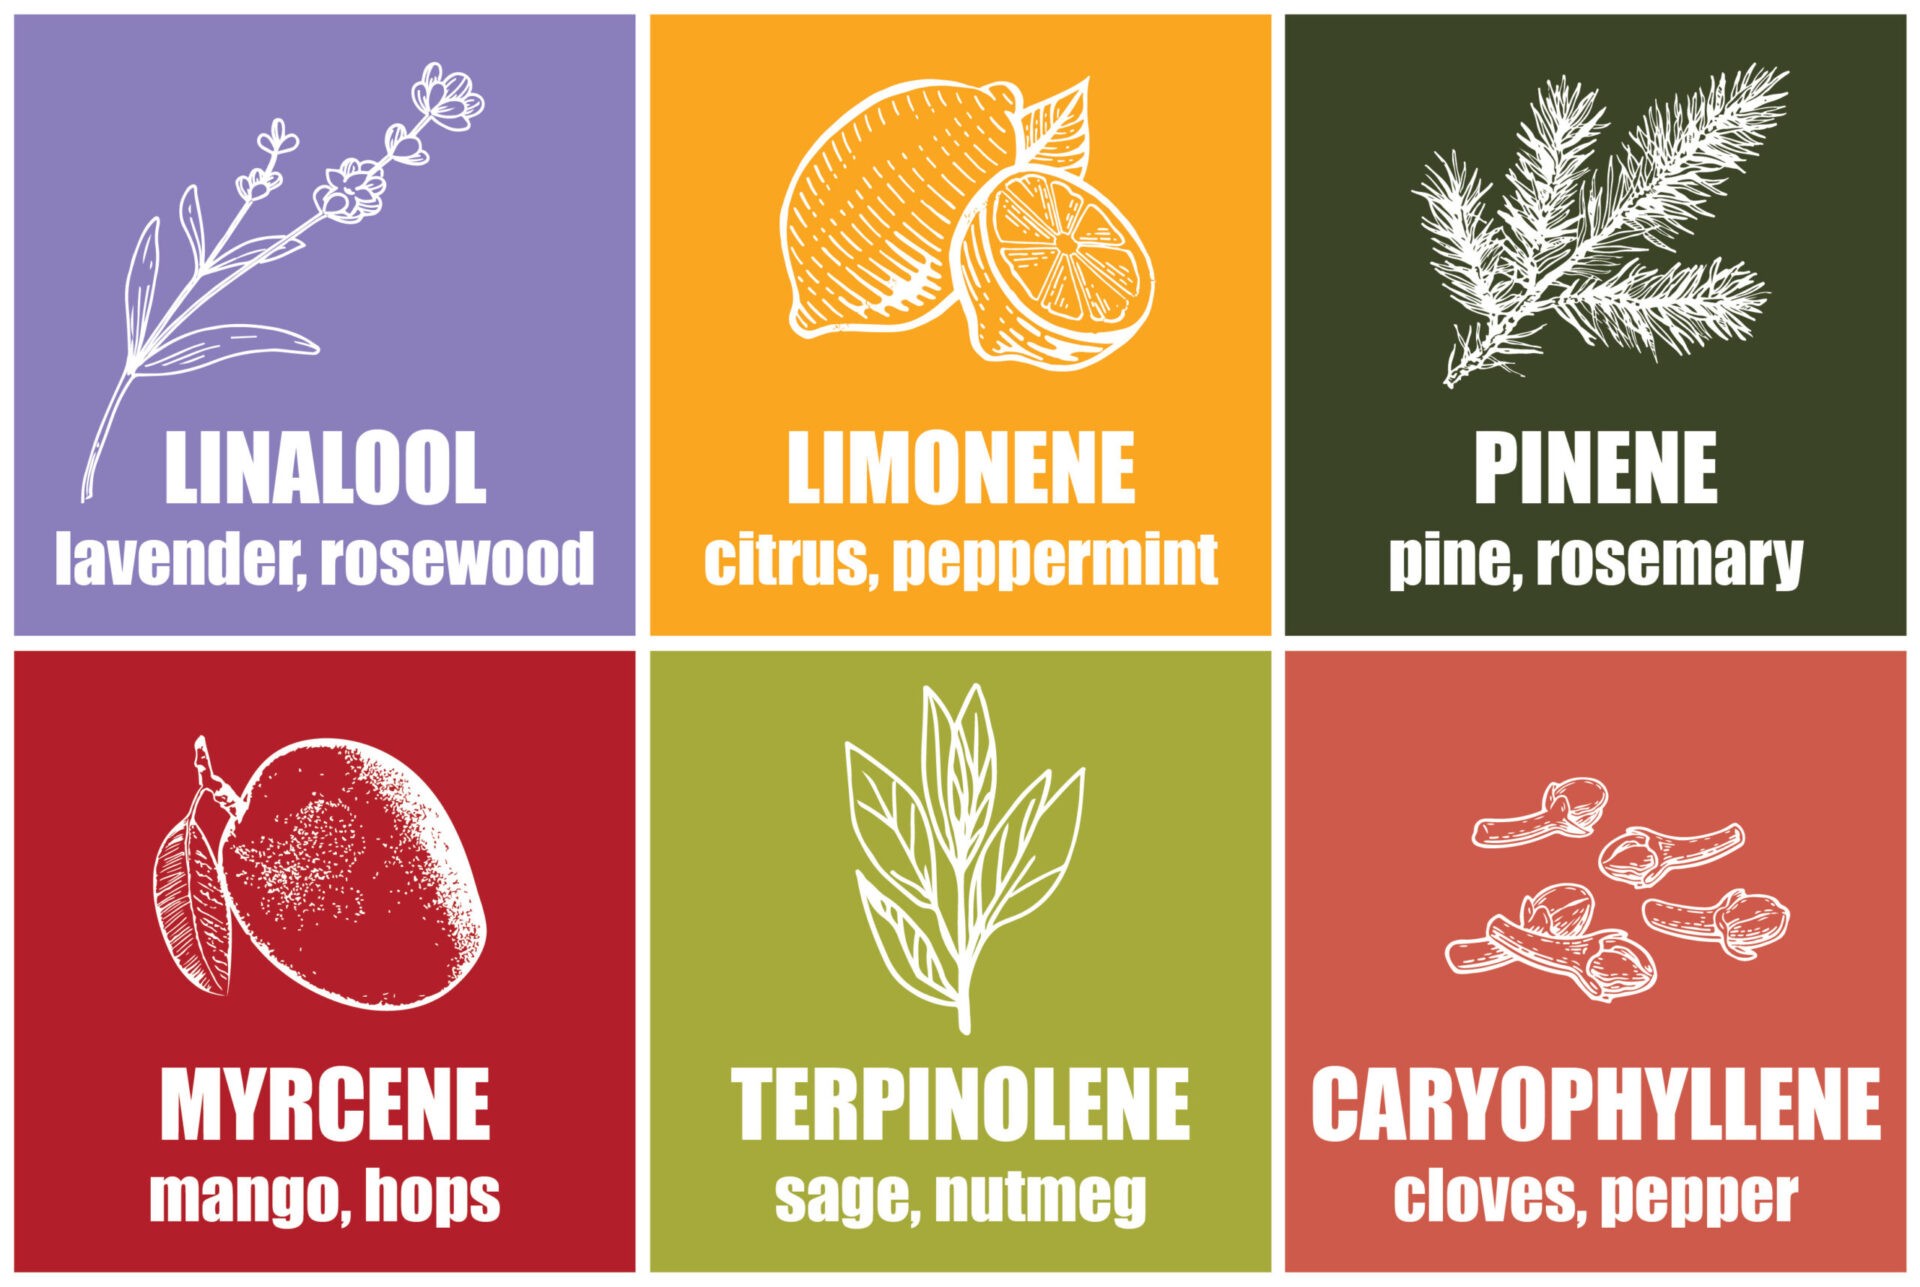 Close-up image of various cannabis terpenes. Terpenes are fragrant oils found in cannabis that contribute to its aroma and flavor. Each terpene has unique properties and potential medicinal benefits, such as reducing inflammation, promoting relaxation, boosting mood, and improving cognition.